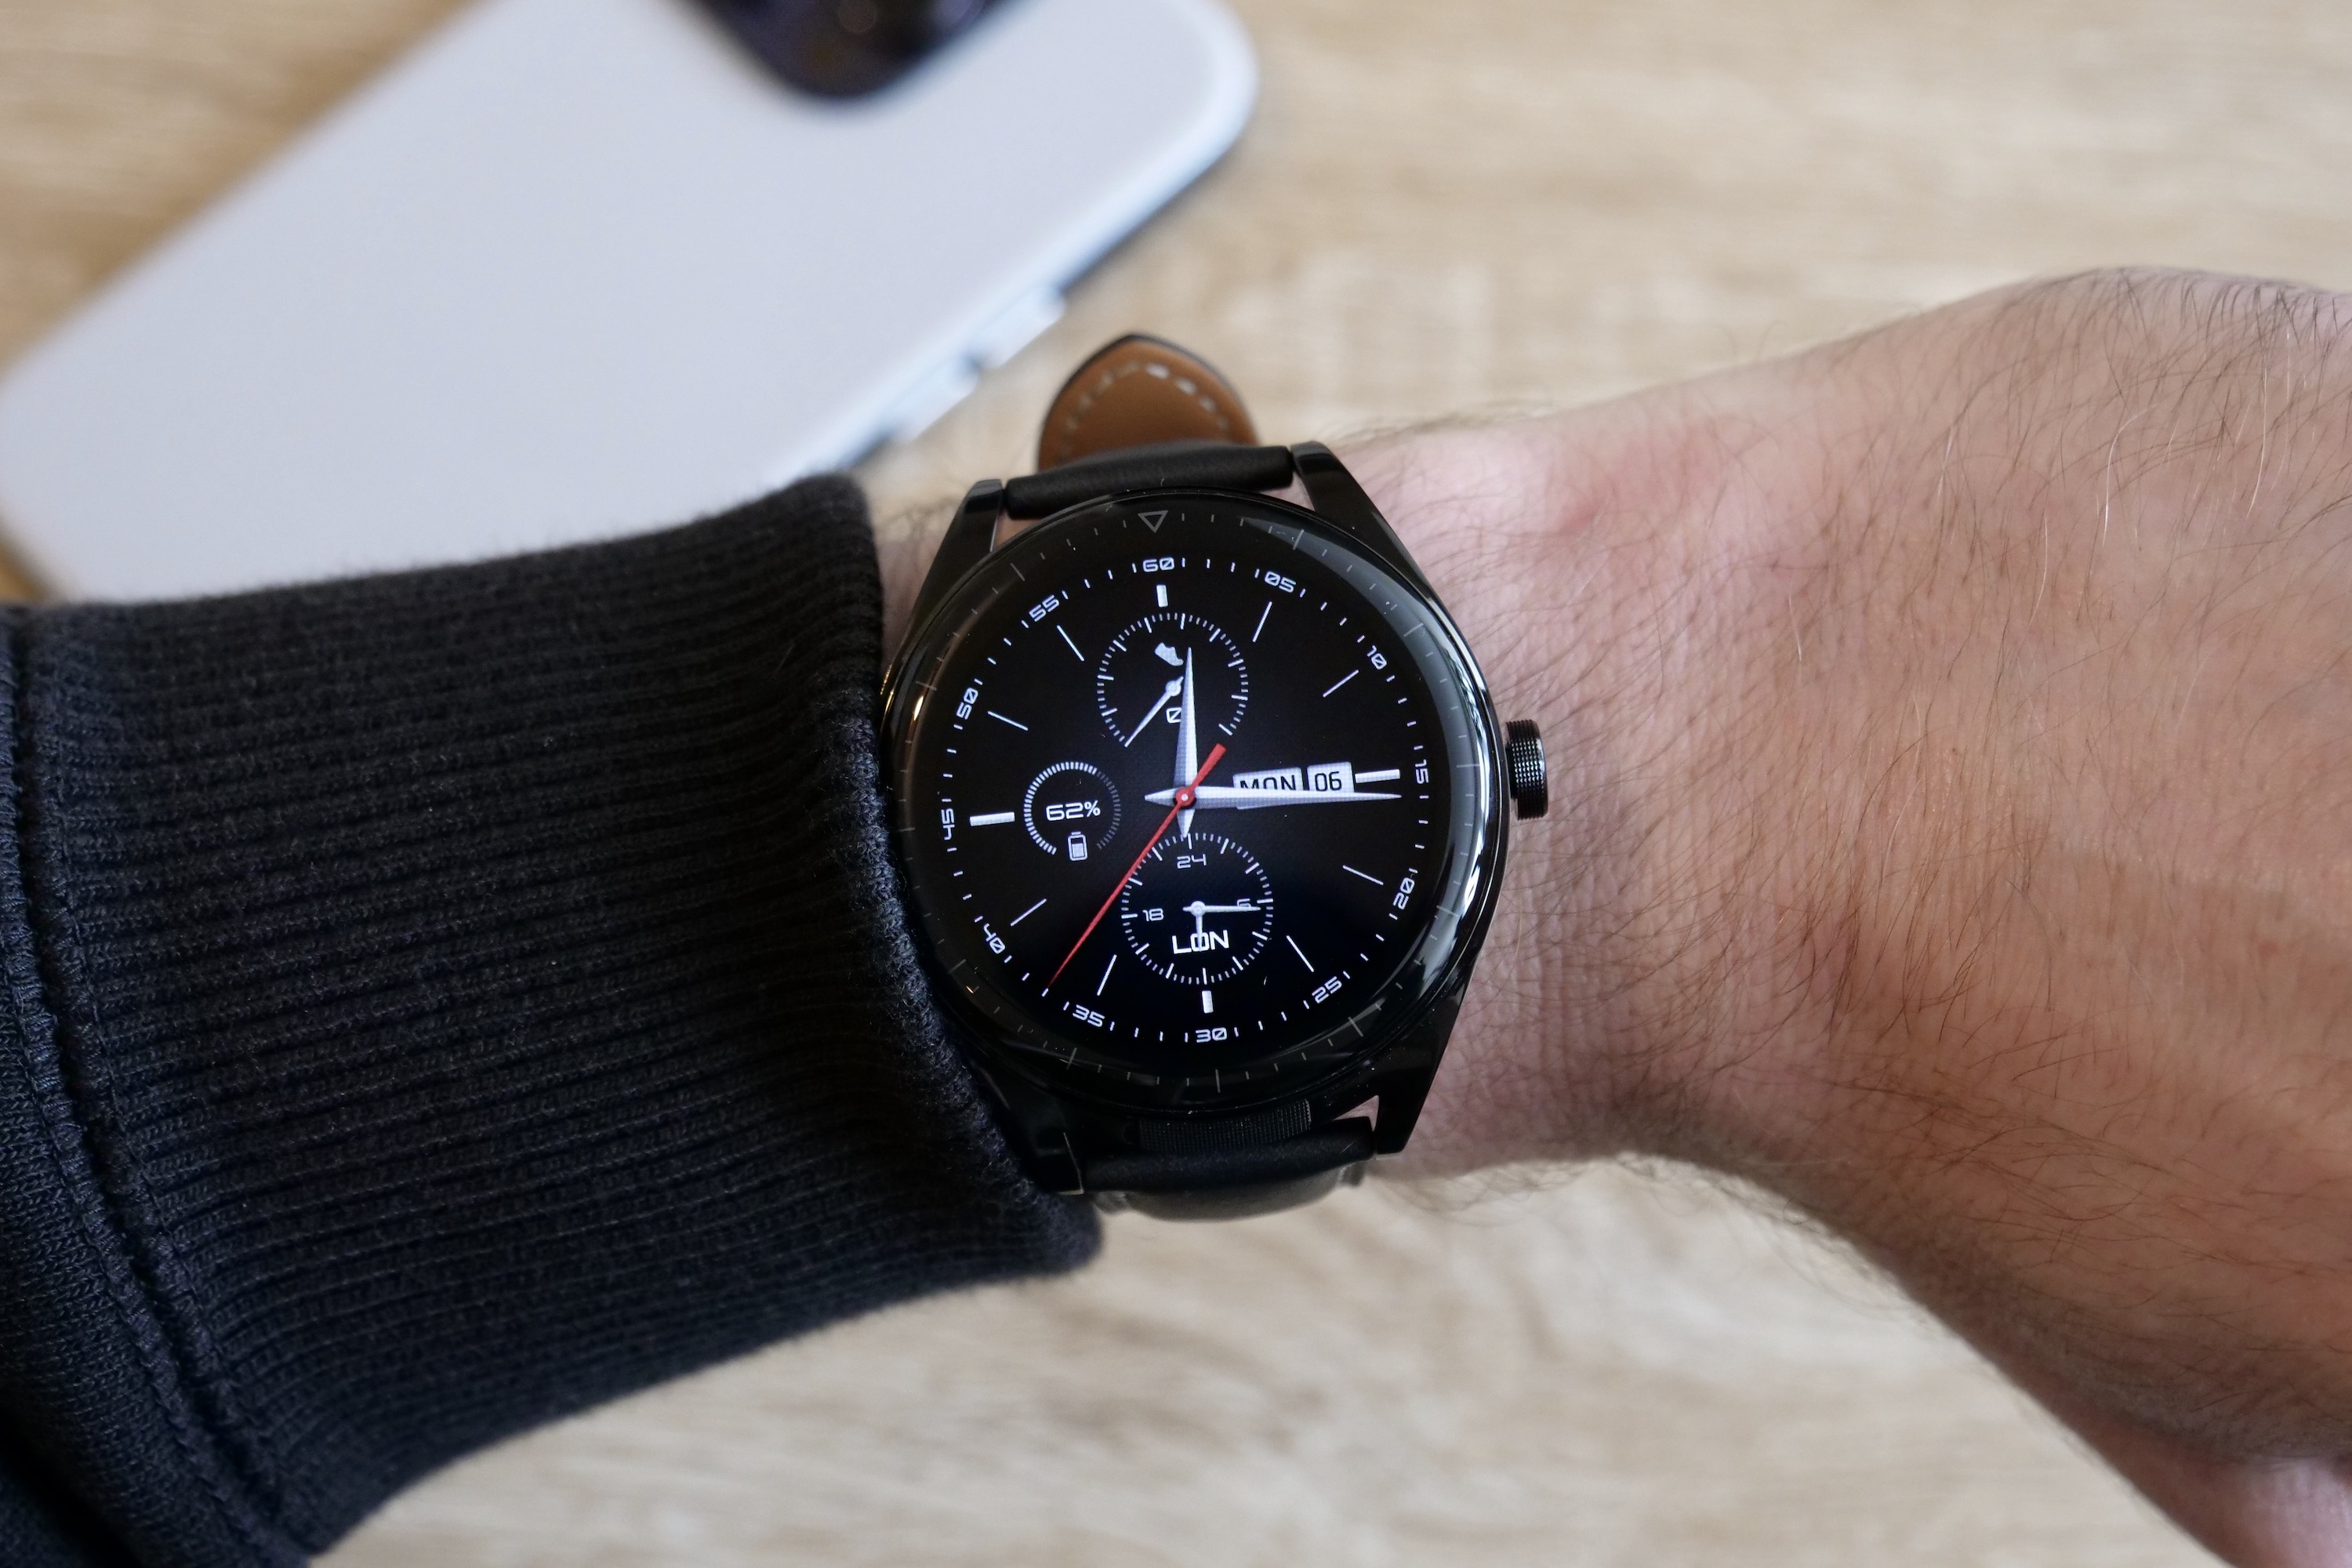 The Huawei Watch Buds on a person's wrist.